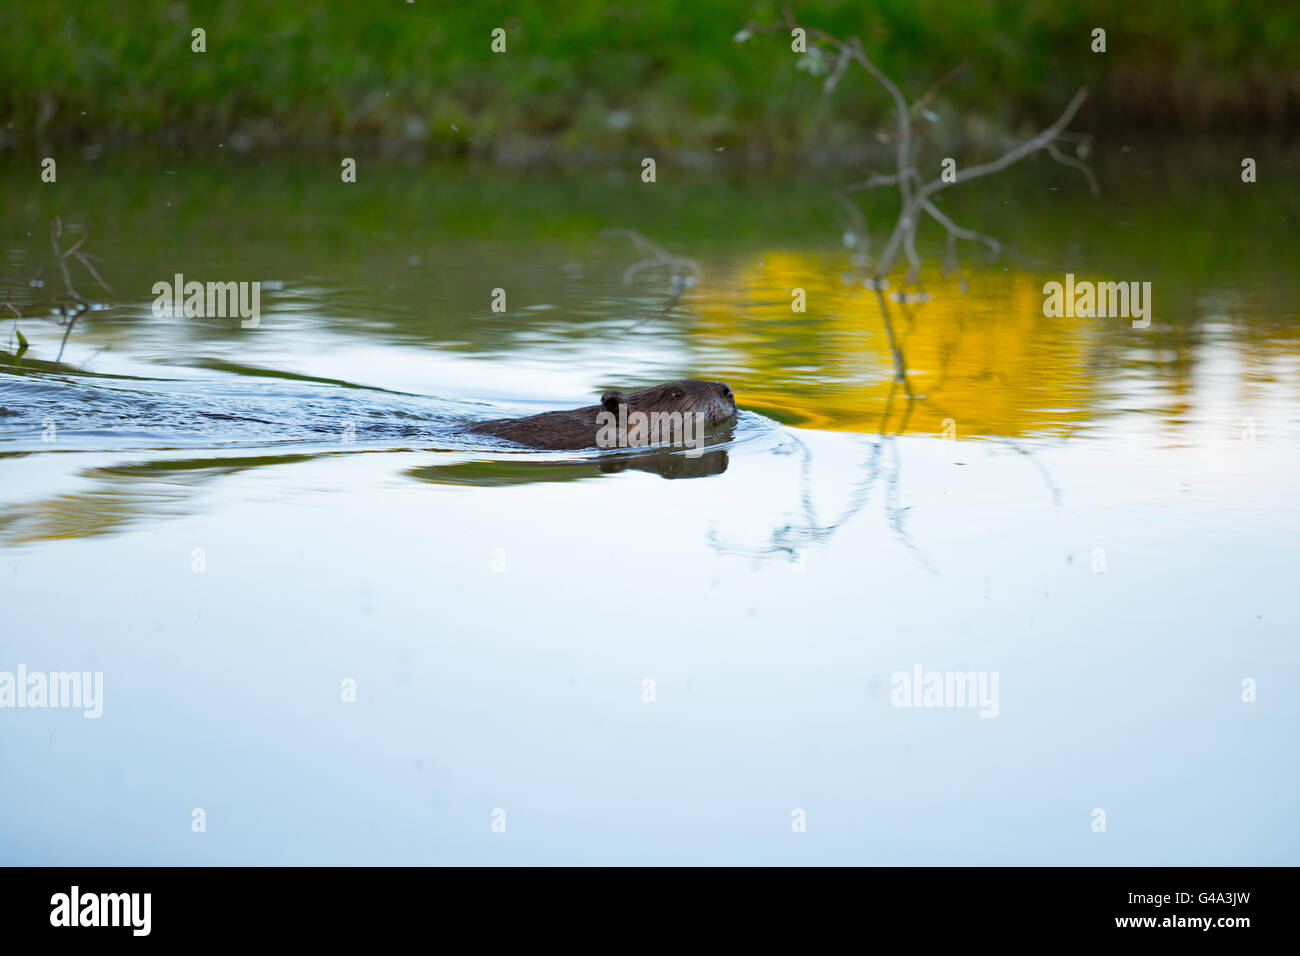 Canadian beaver in pond Stock Photo